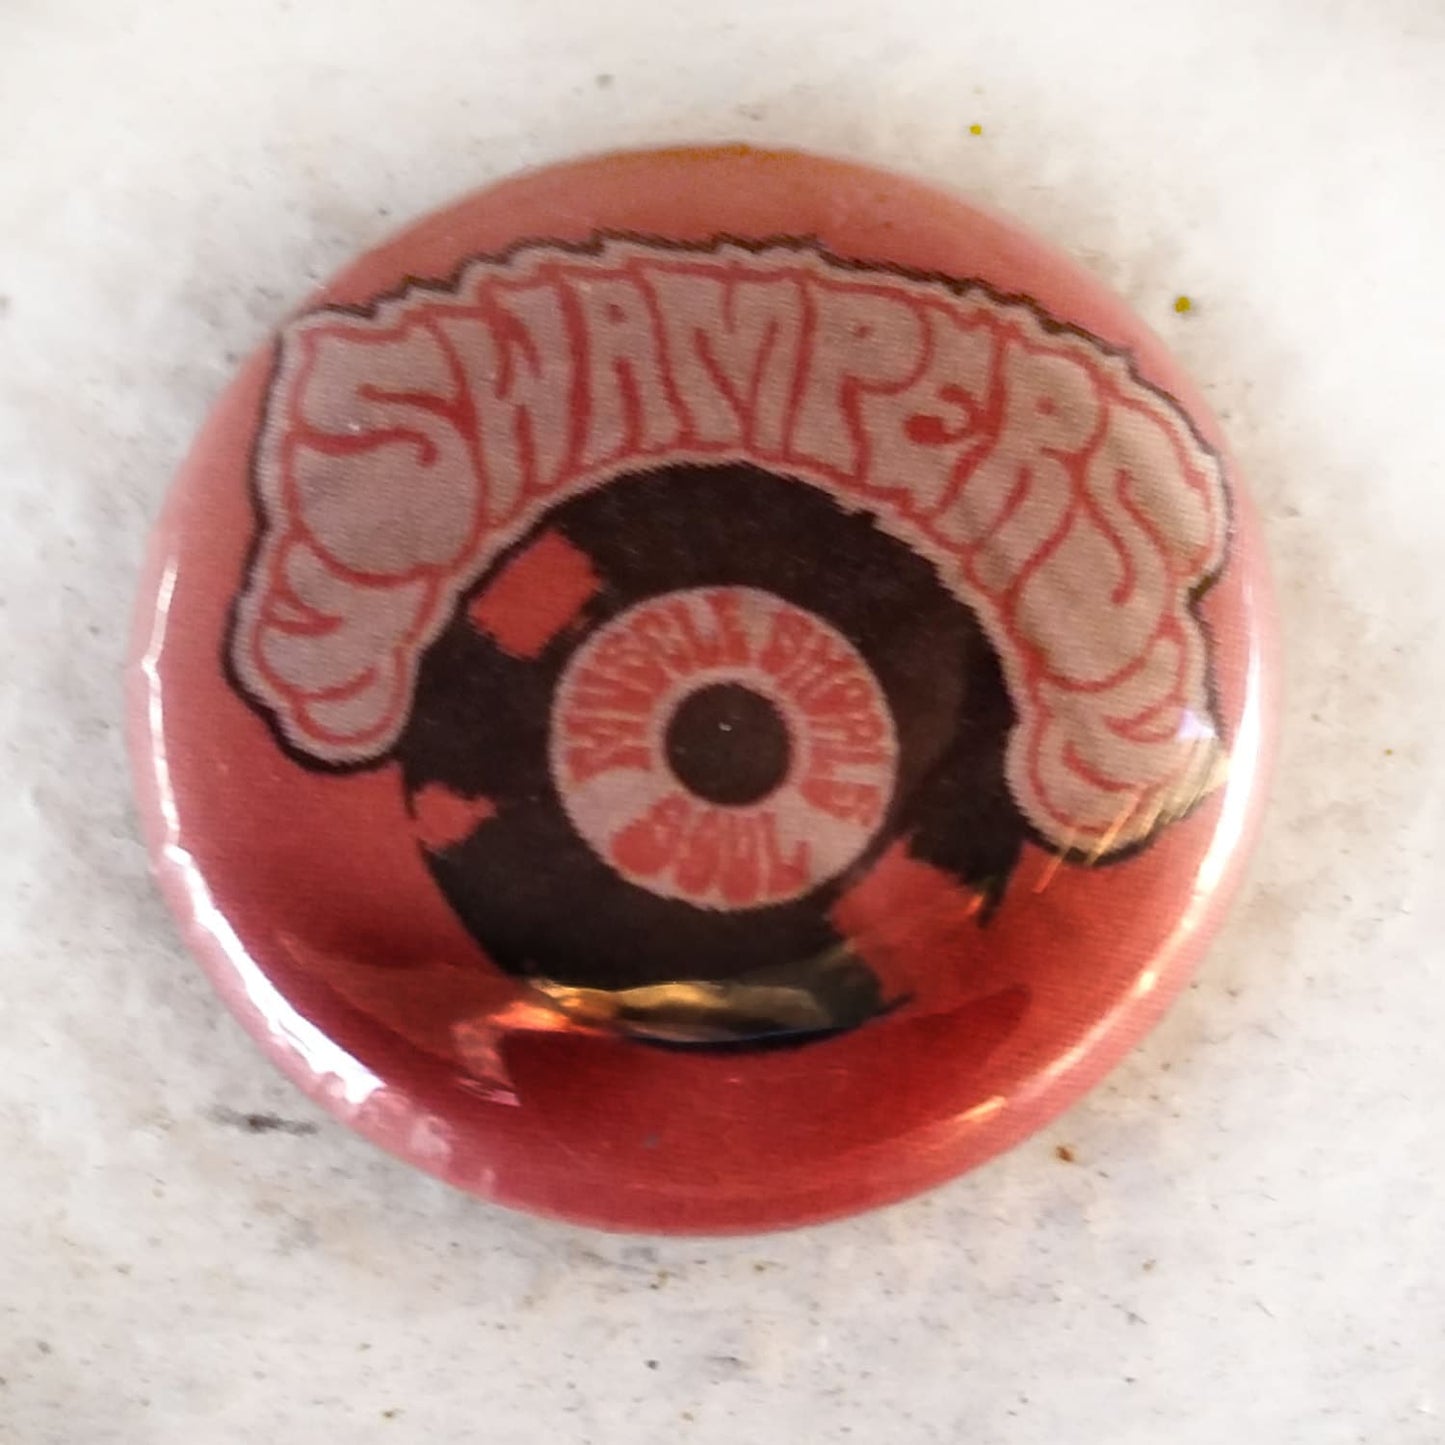 The Swampers 1 inch Button